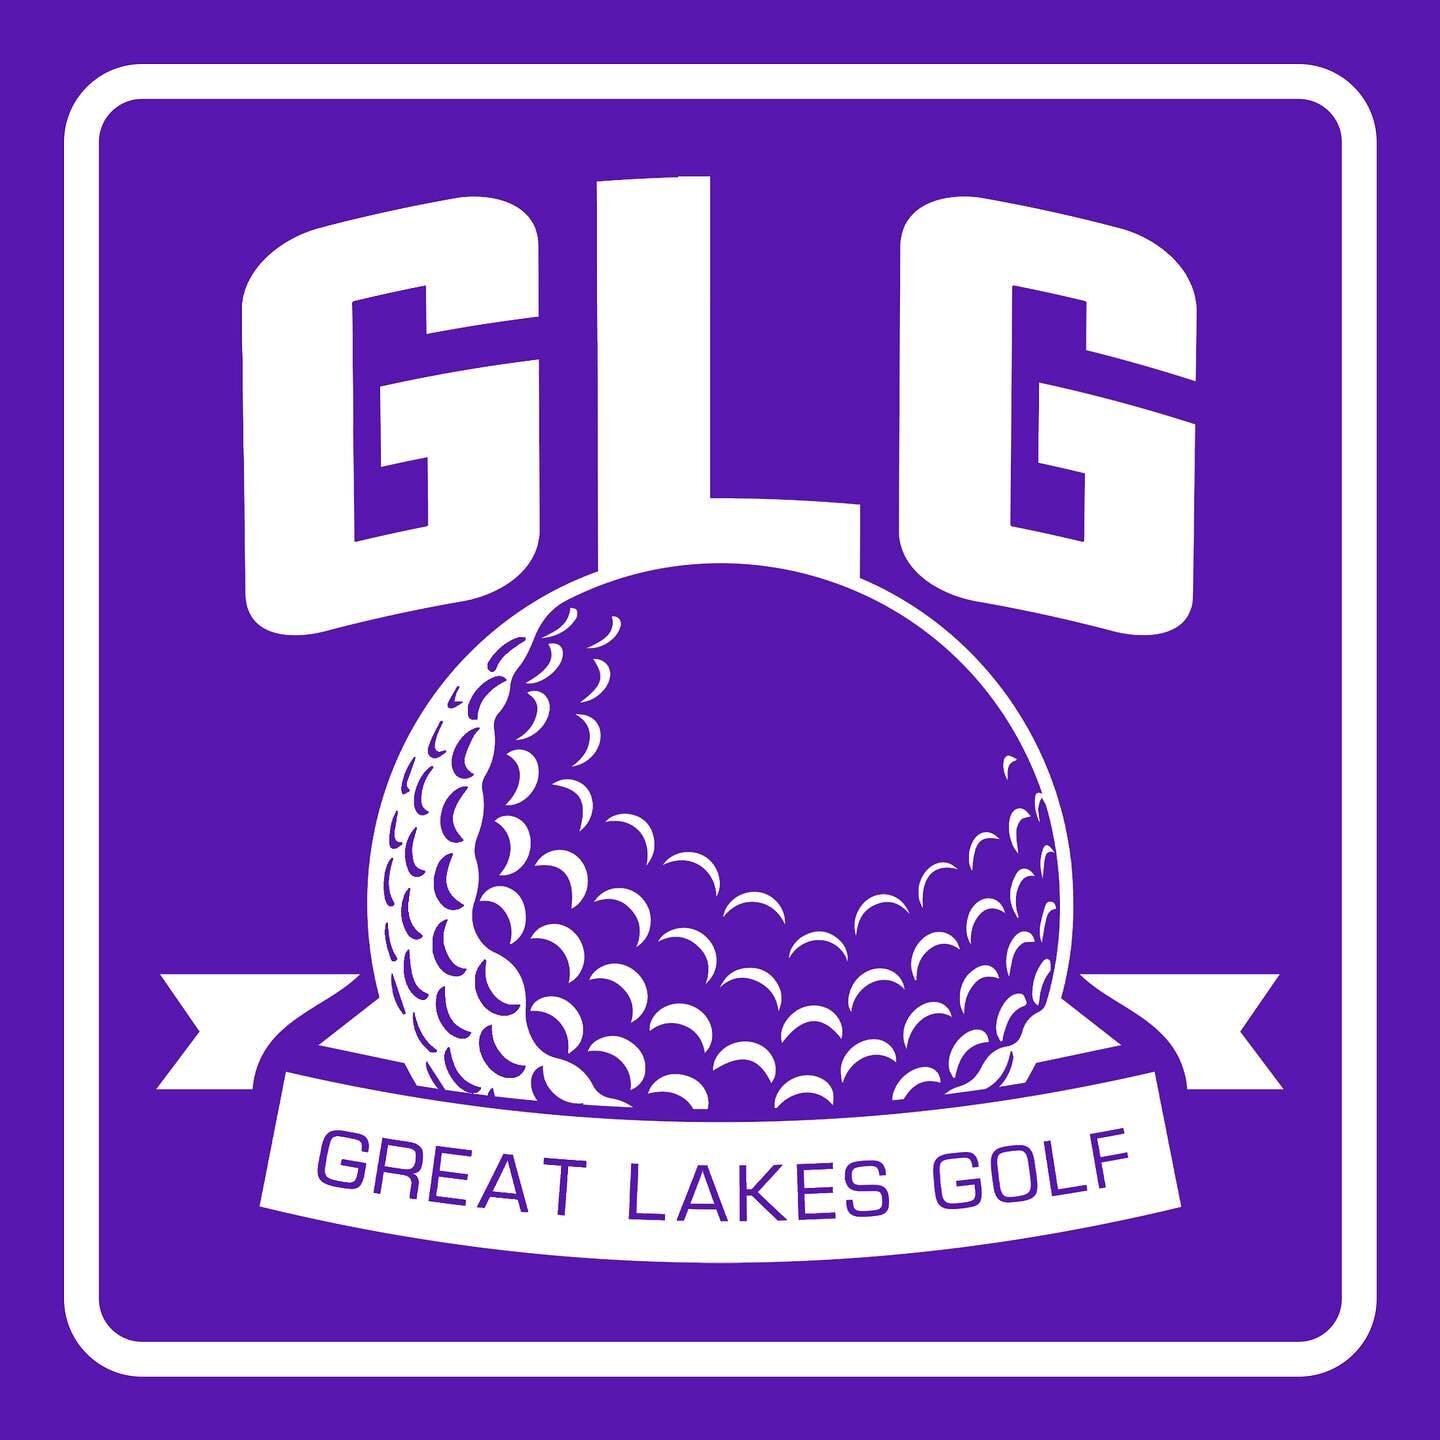 It&rsquo;s 2024 and with the current state of the gaming industry we are being forced to make another pivot. Starting this May we will be rebranding Great Lakes Gaming to &lsquo;Great Lakes Golfing&rsquo;

Enjoy hitting golf balls into the green on P